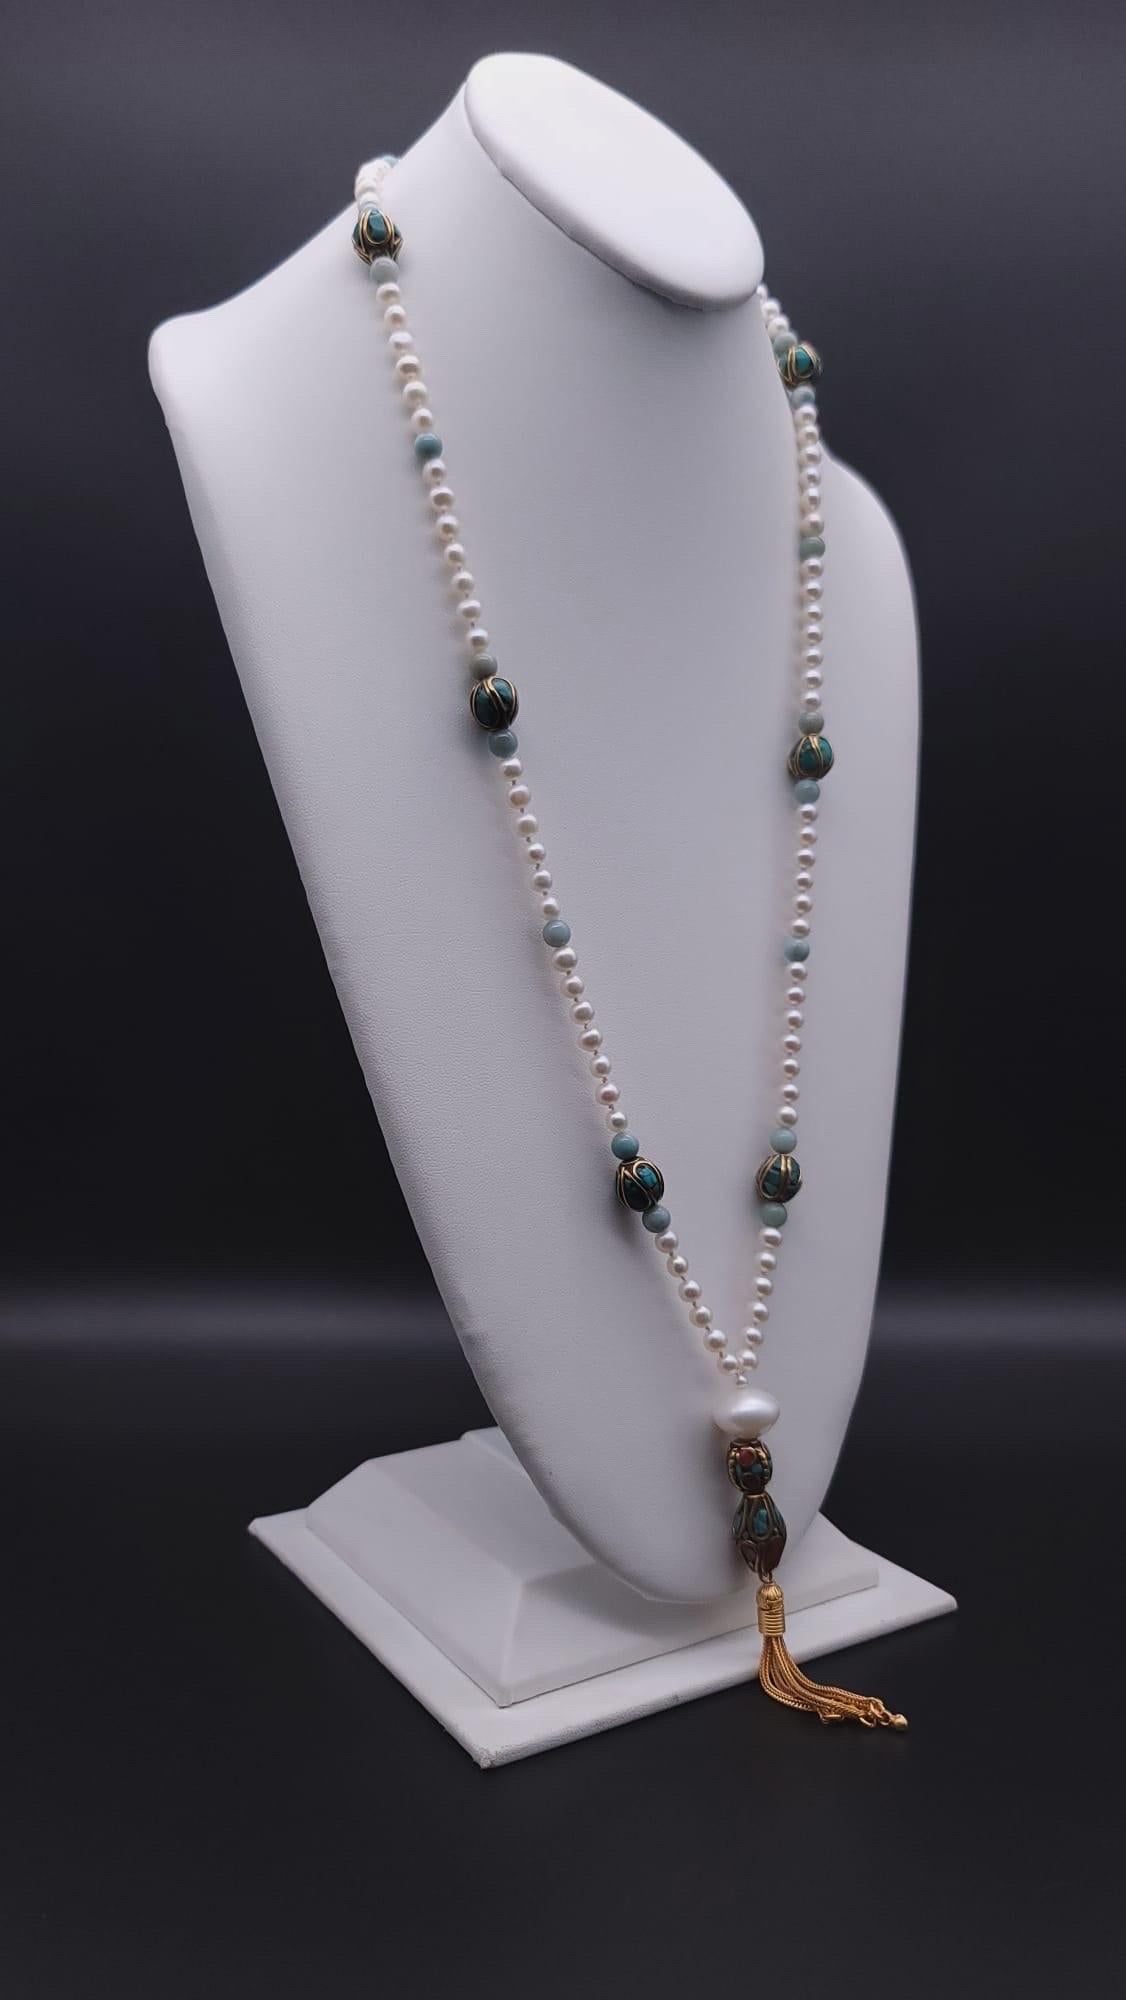 One-of-a-Kind

Who says simple has to be boring? 

Turquoise and bits of coral painstakingly inlaid into Tibetan beads are surrounded by small well -matched 5mm Freshwater Pearls. Those, in turn, are guarded by subtly colored Amazonite polished